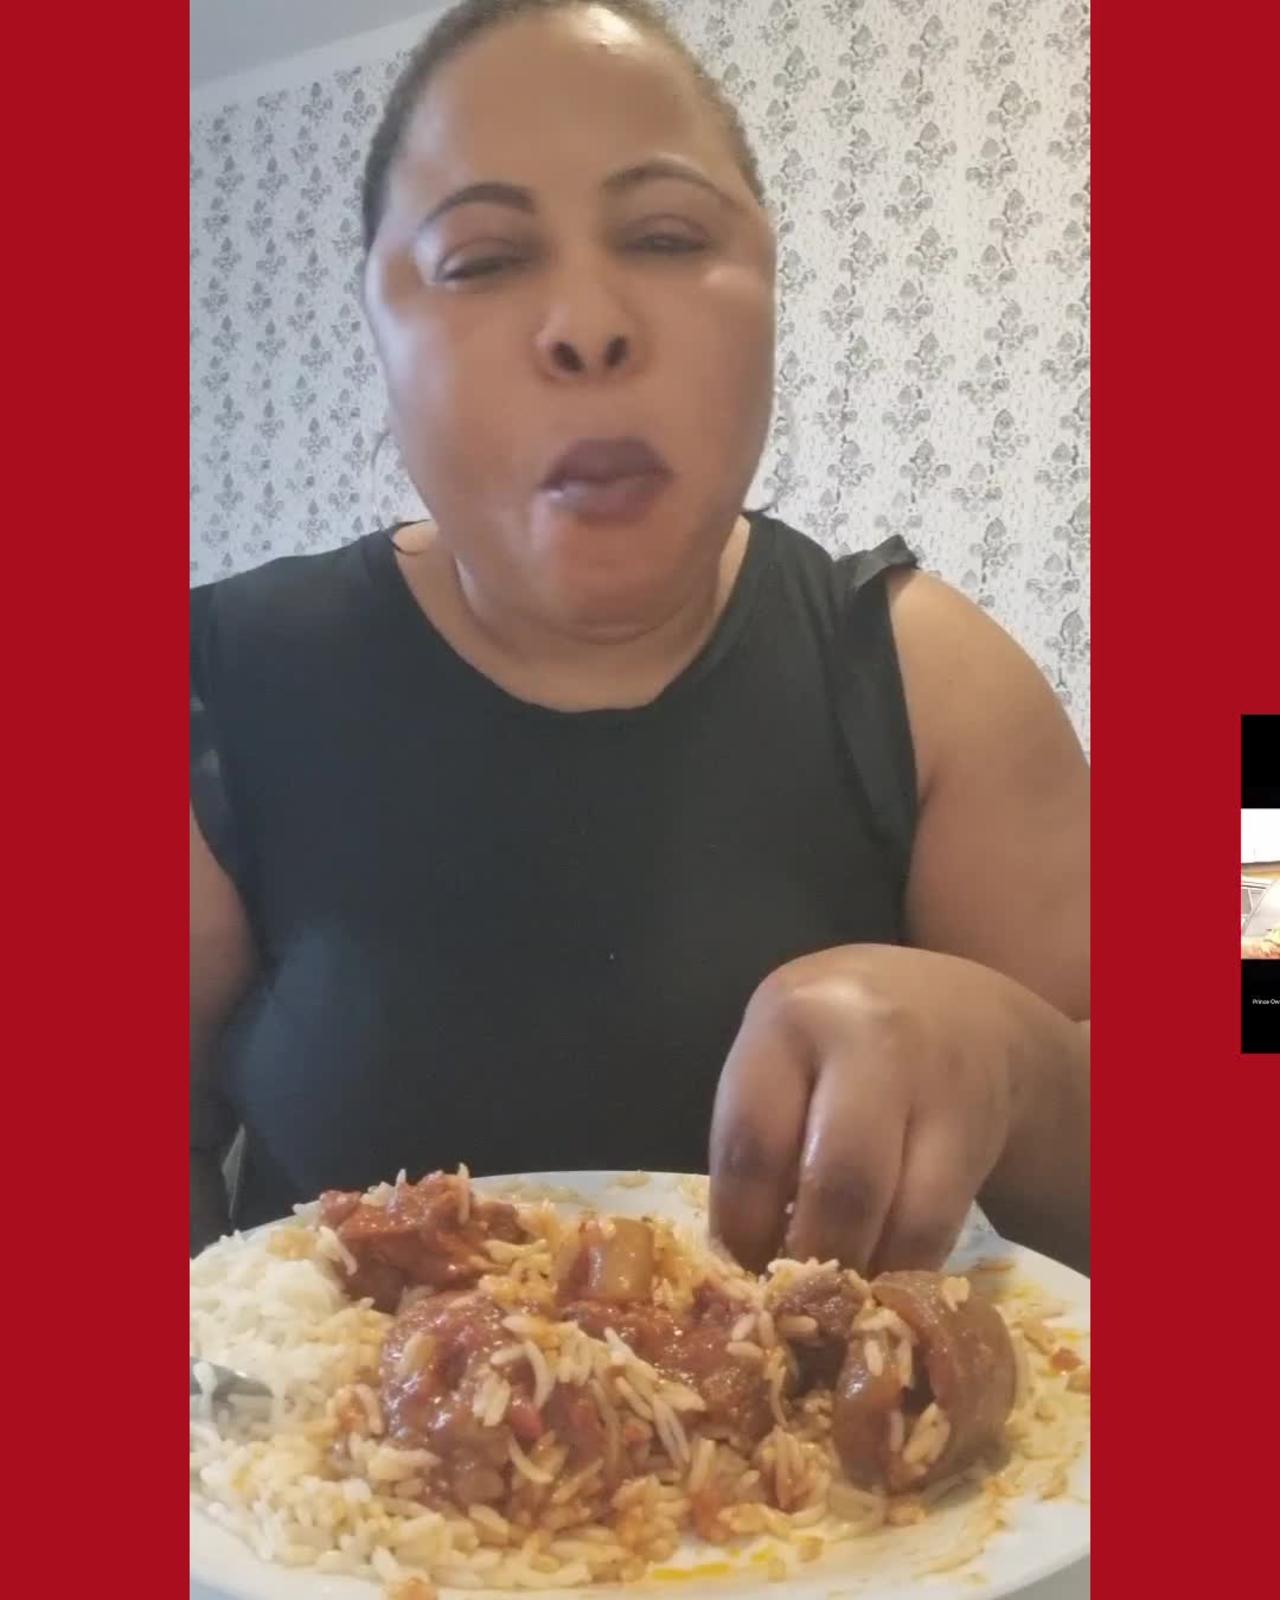 MUKBANG food fast eating and funny video